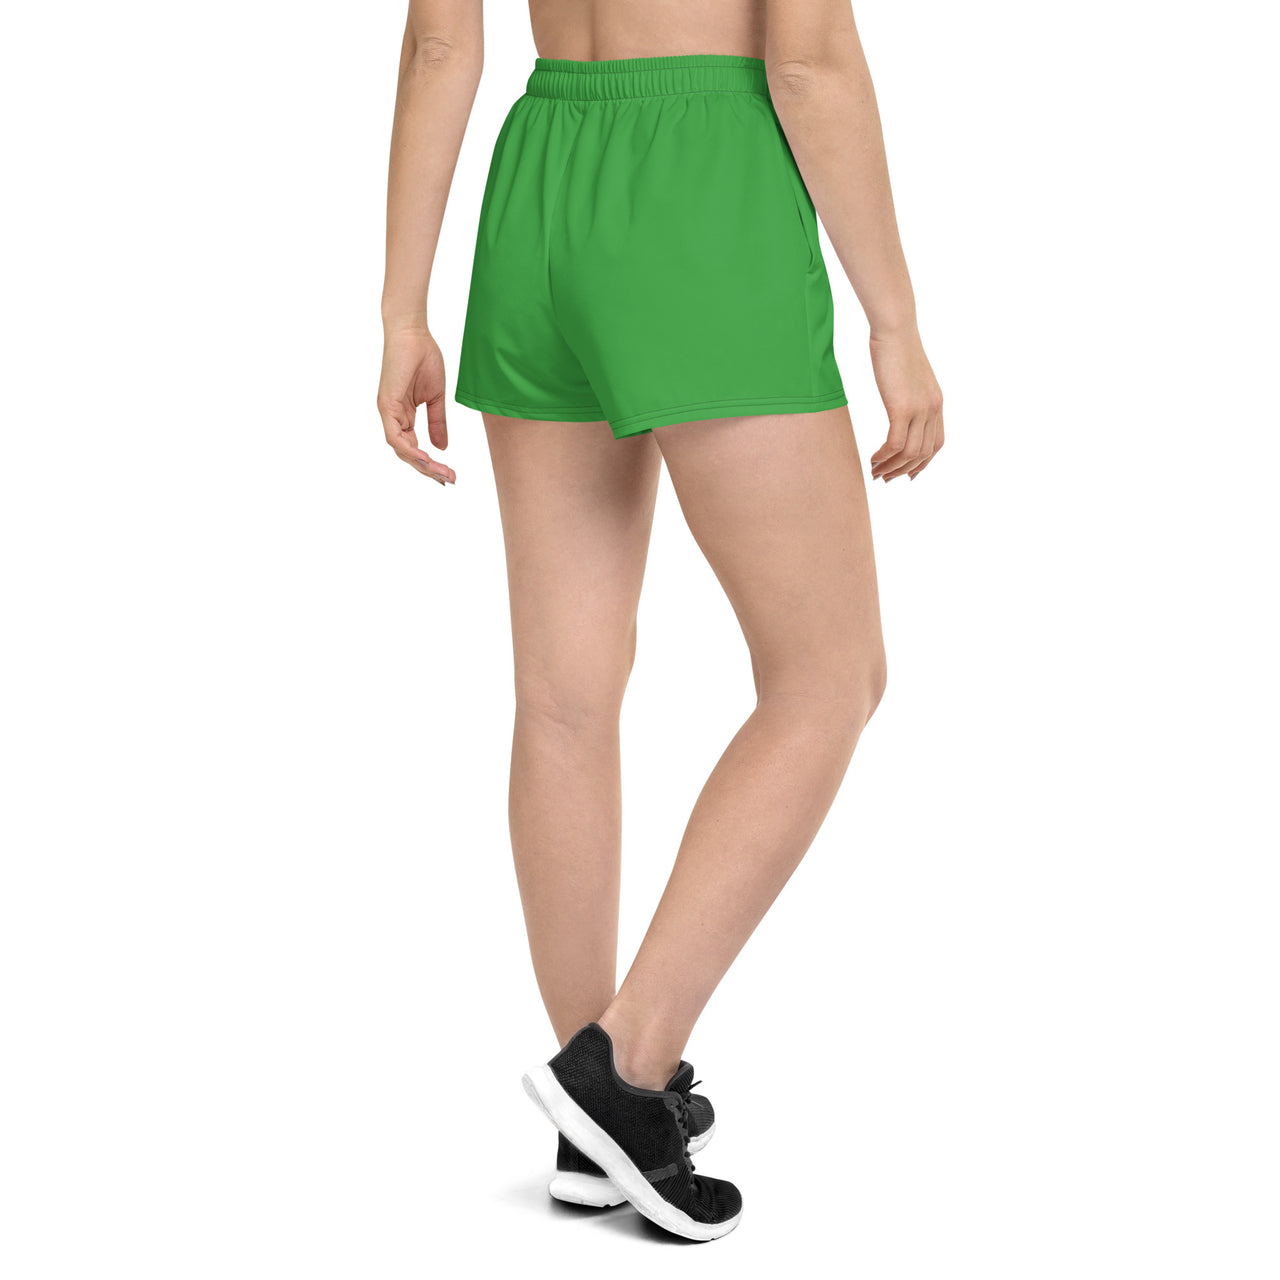 Women’s Recycled Solid Athletic Shorts - Green SHAVA CO